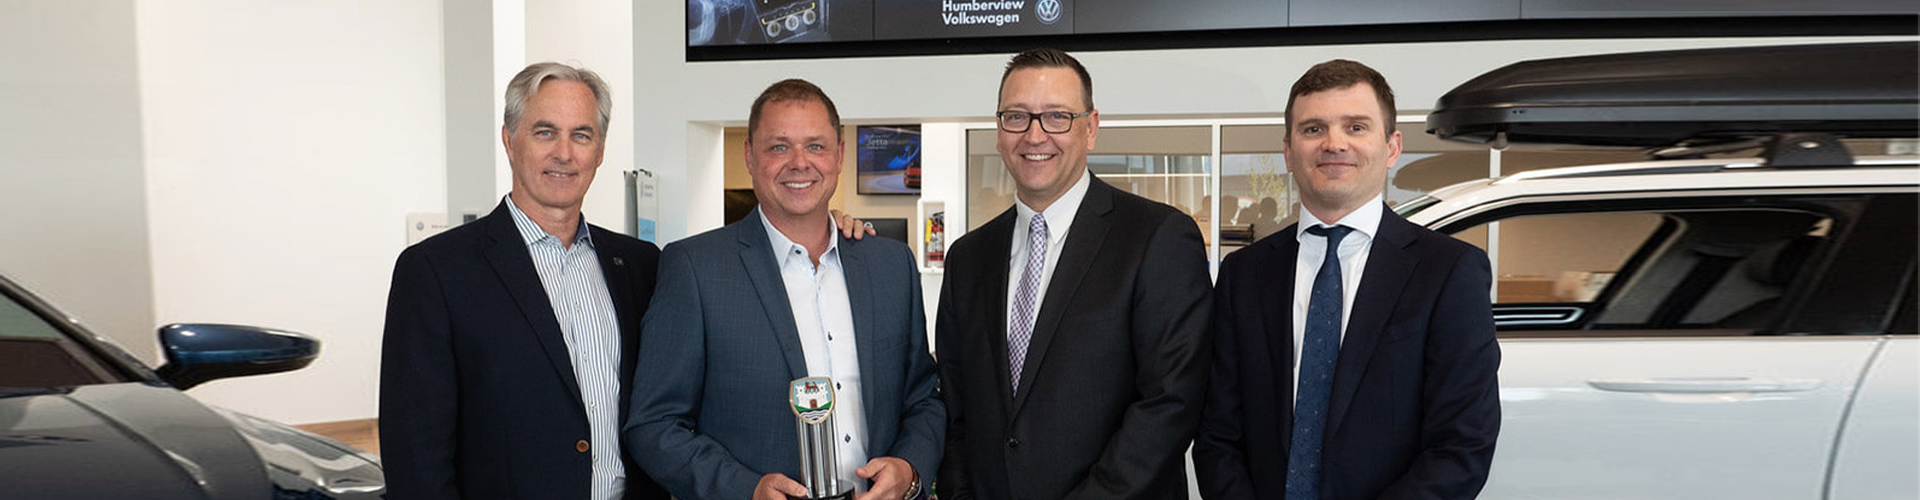 Humberview Volkswagen Wins Prestigious Award For 3rd Consecutive Year